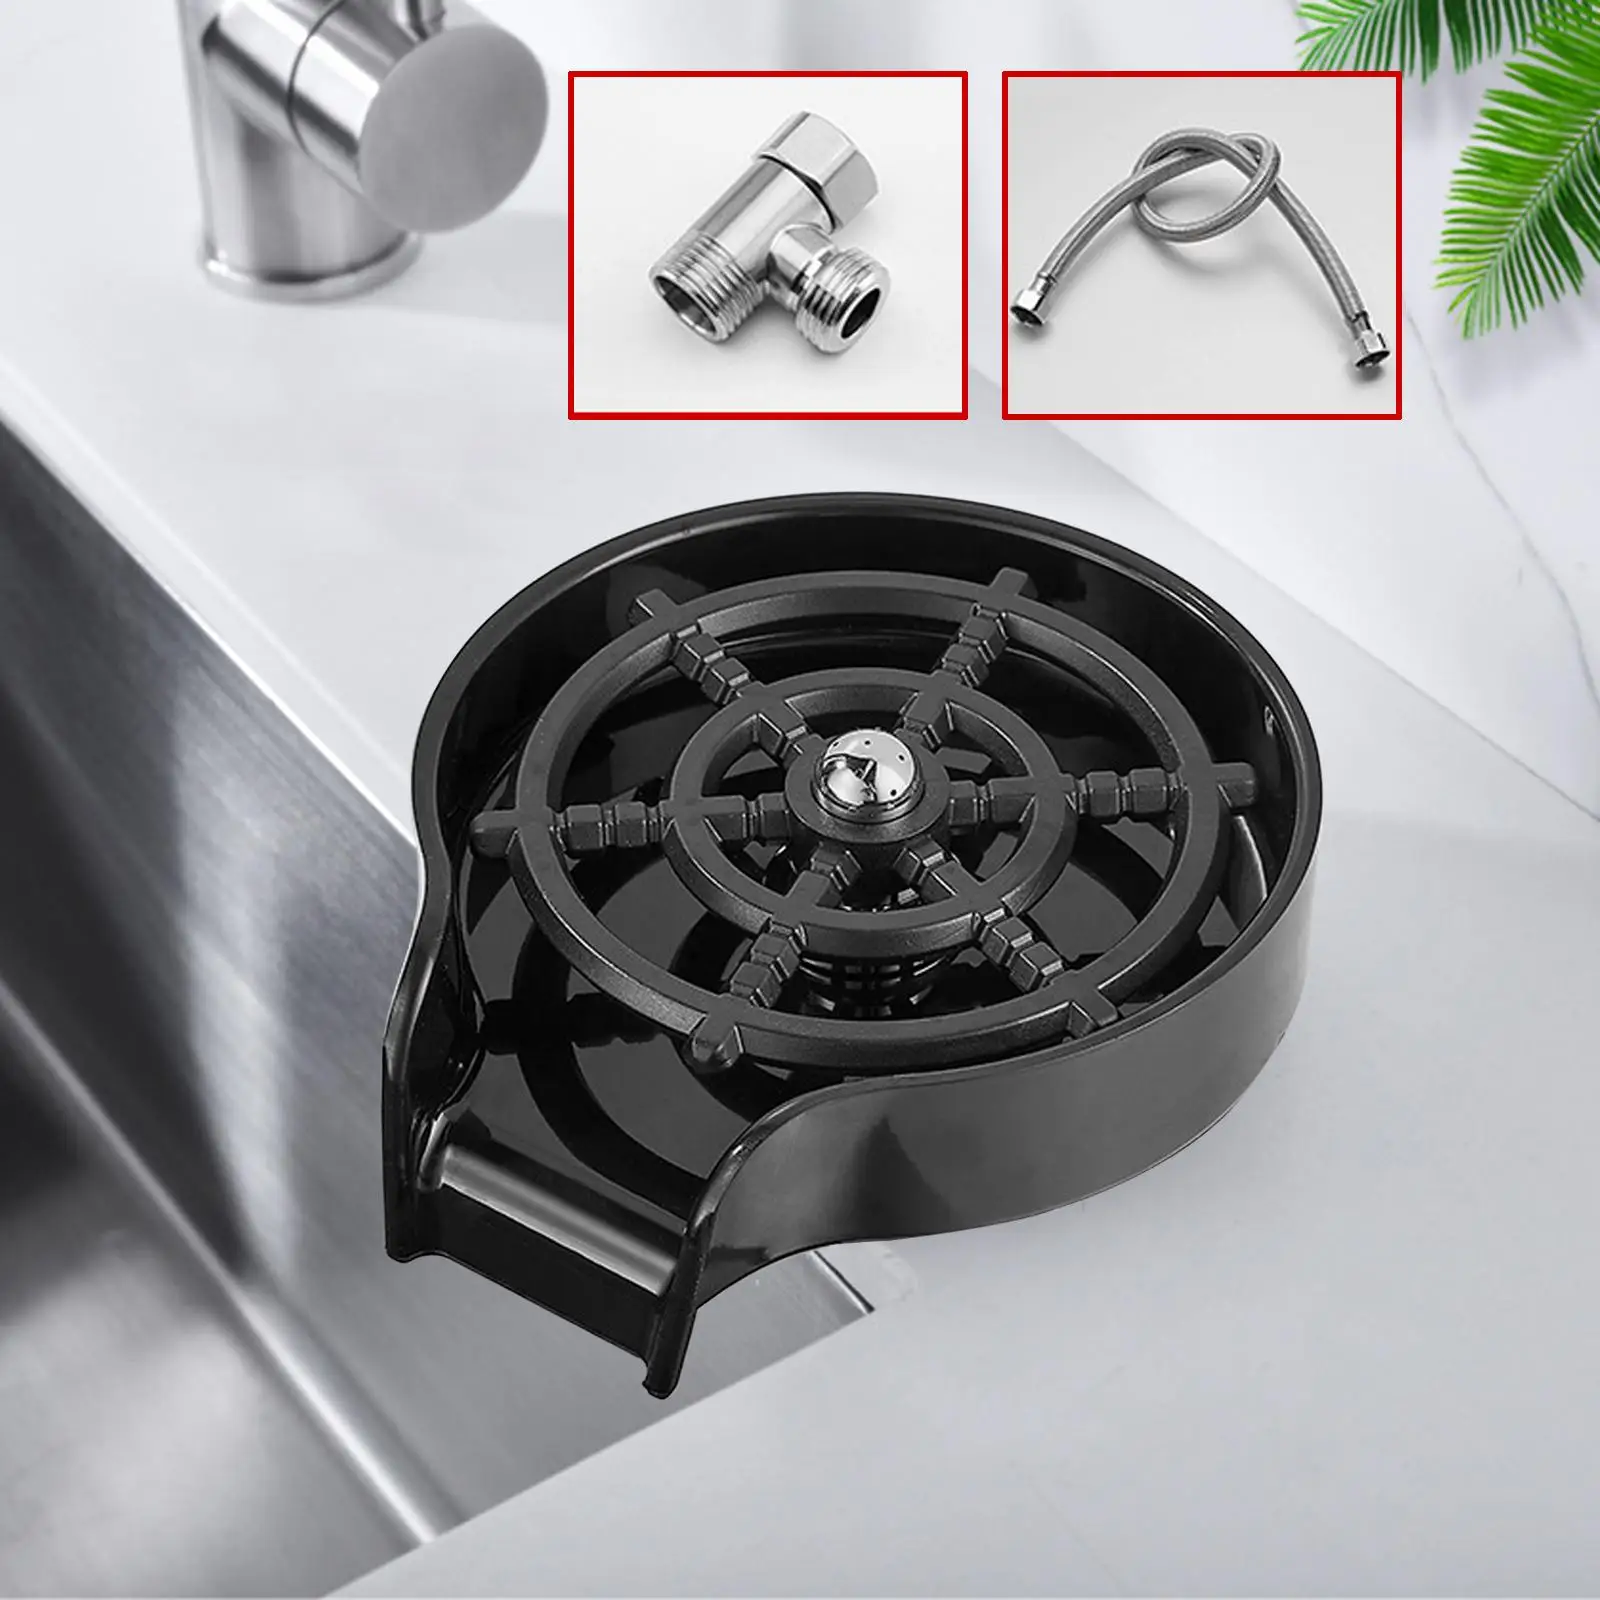 High Pressure Cup Washer Spraying Holes Bottle Washer milk cups Washer Kitchen Sink Automatic Flushing Device for Glass Cleaner